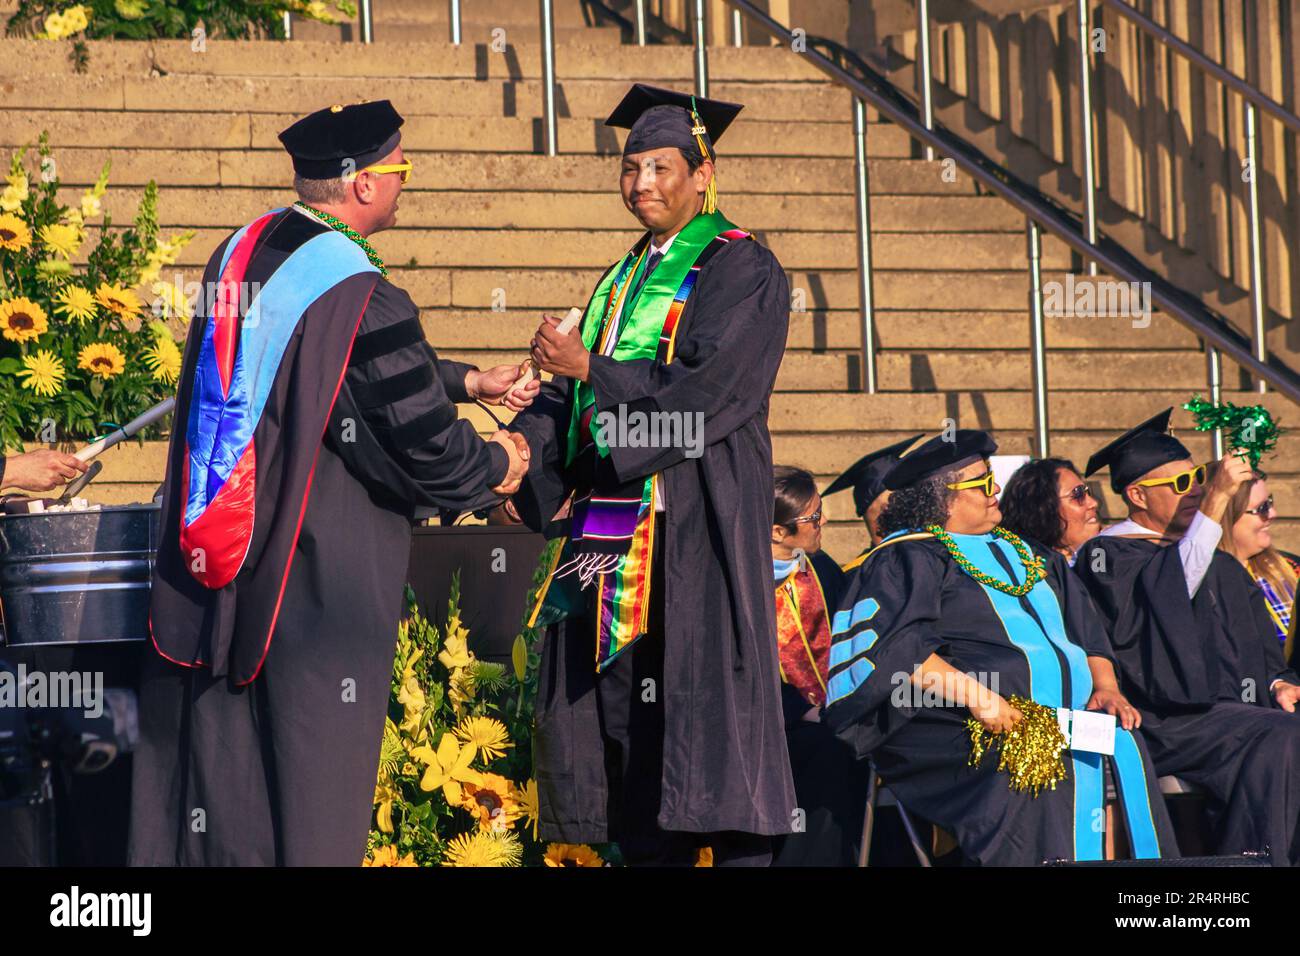 The image captures a defining moment as Crafton Hills College President, Dr. Kevin Horan, hands Gio Skelton his diploma and associate of arts degree Stock Photo